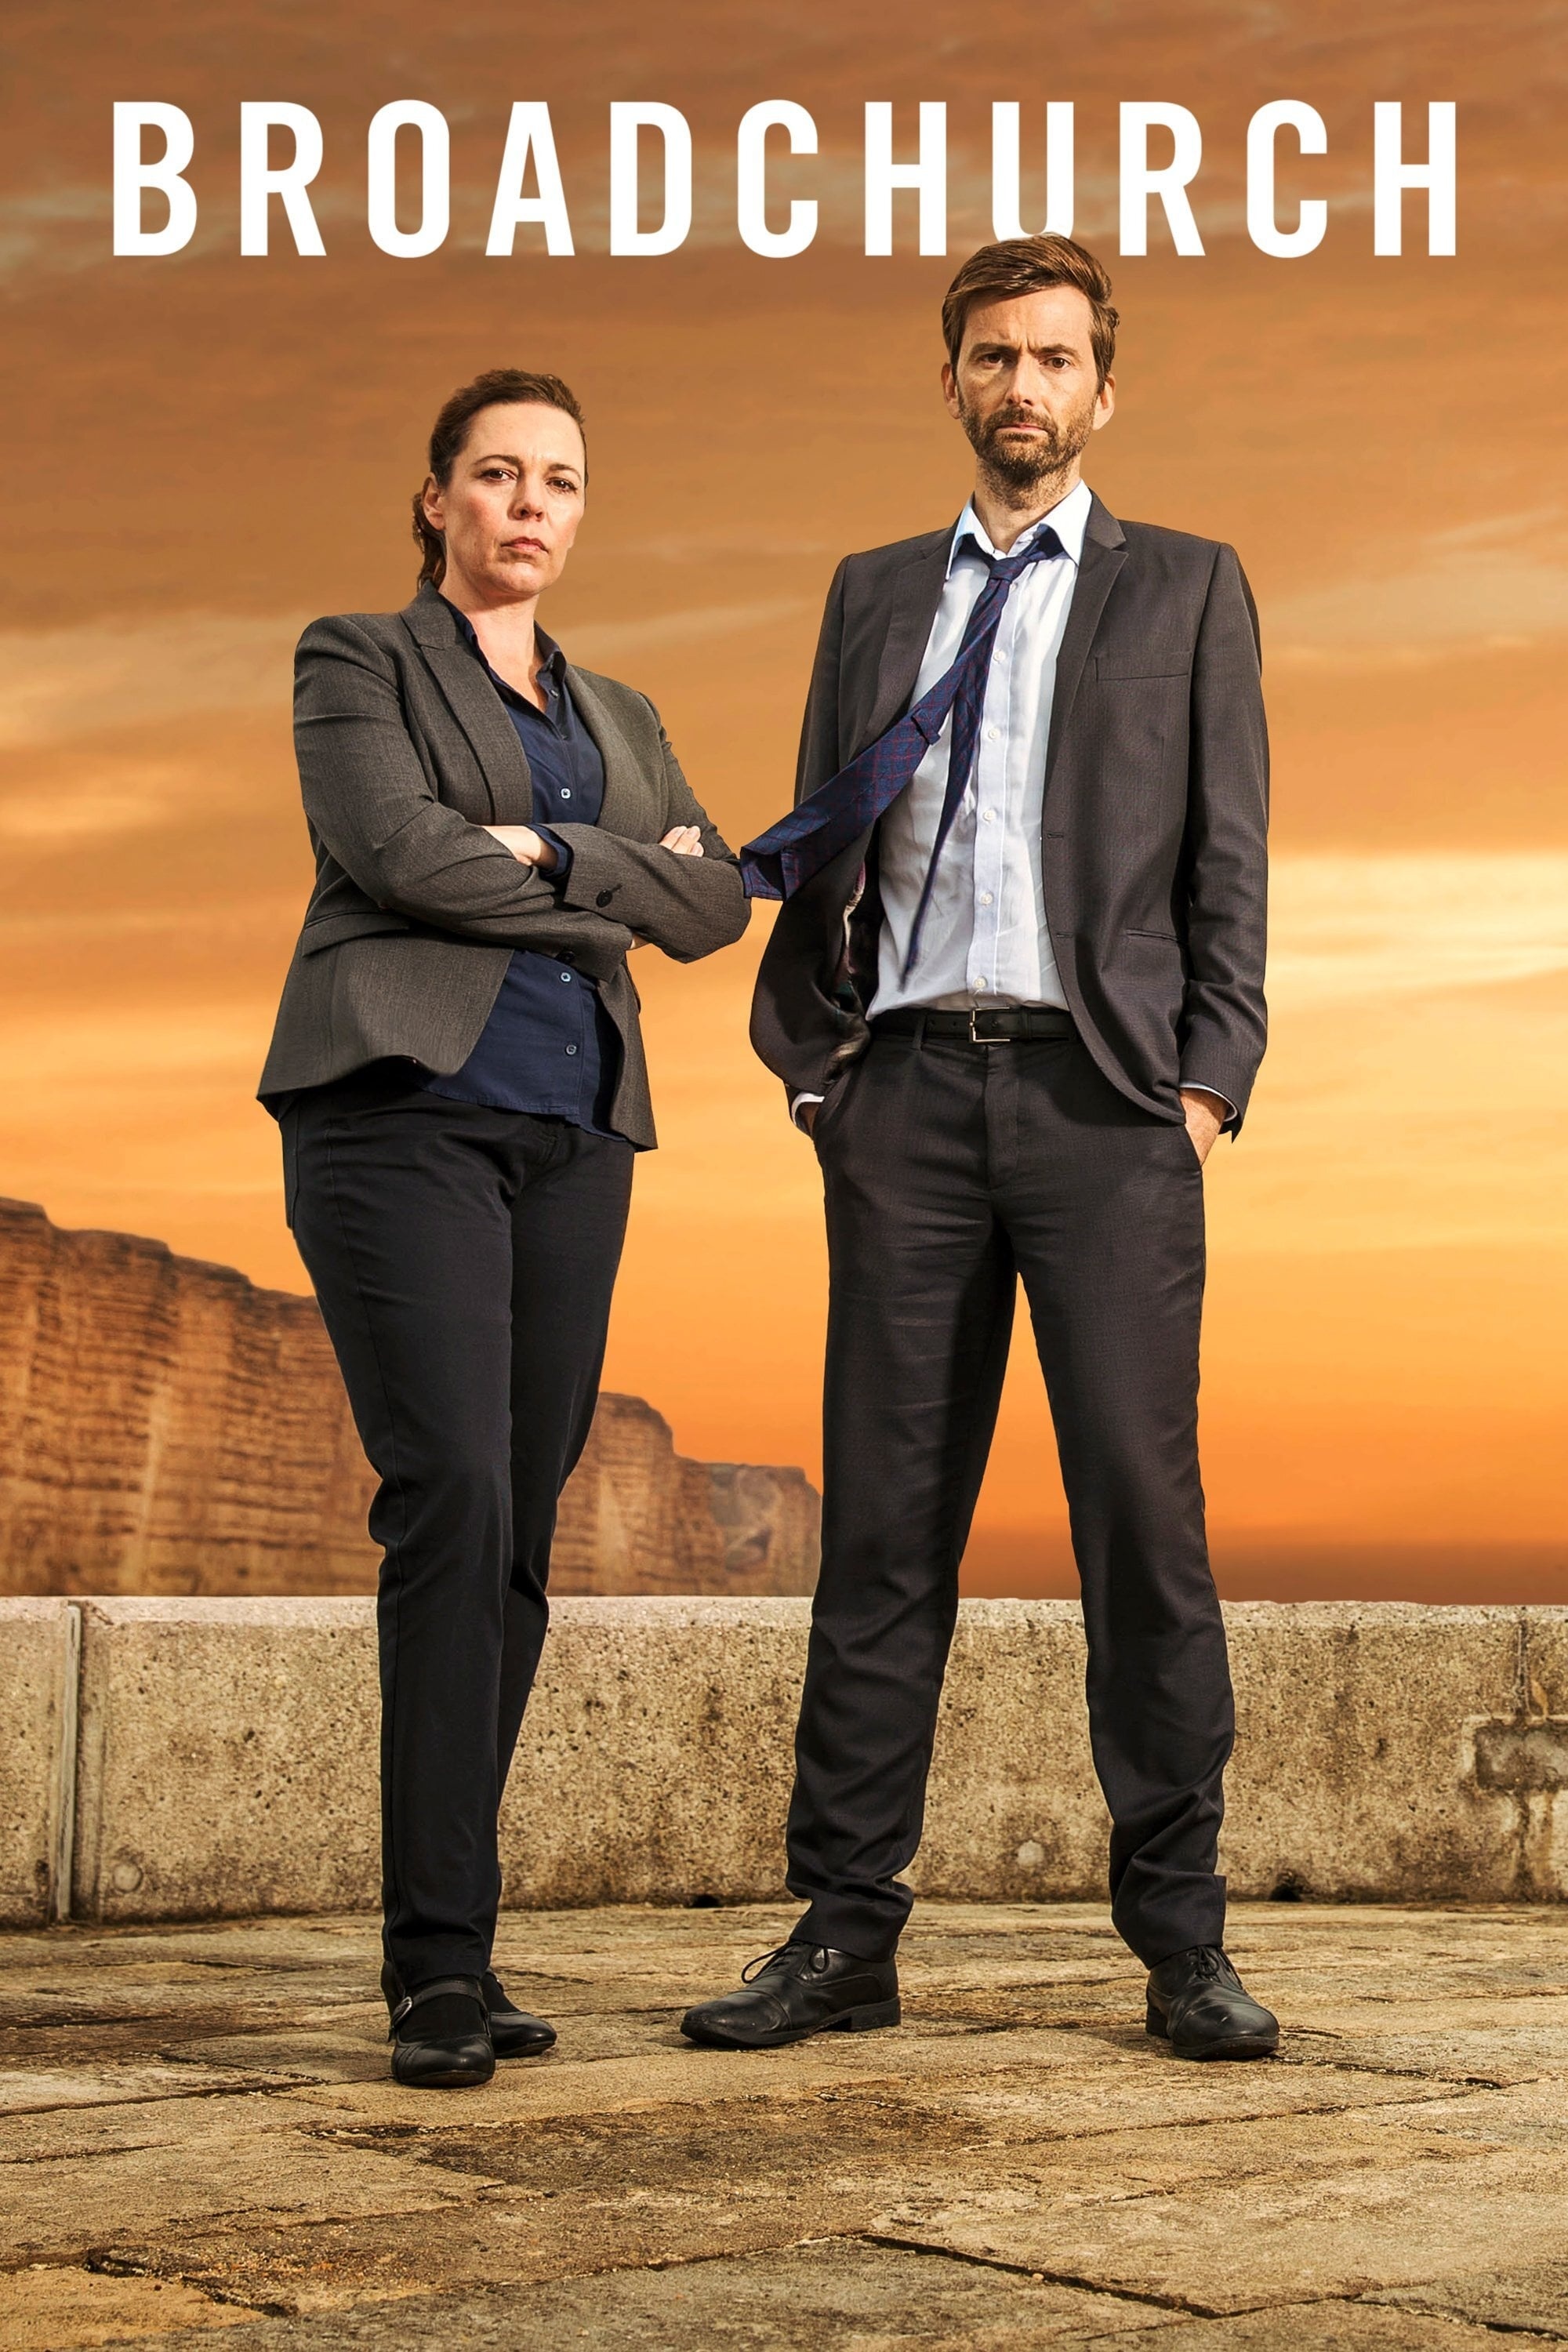 Broadchurch TV Series, Posters collection, Engaging promotional materials, Captivating imagery, 2000x3000 HD Handy